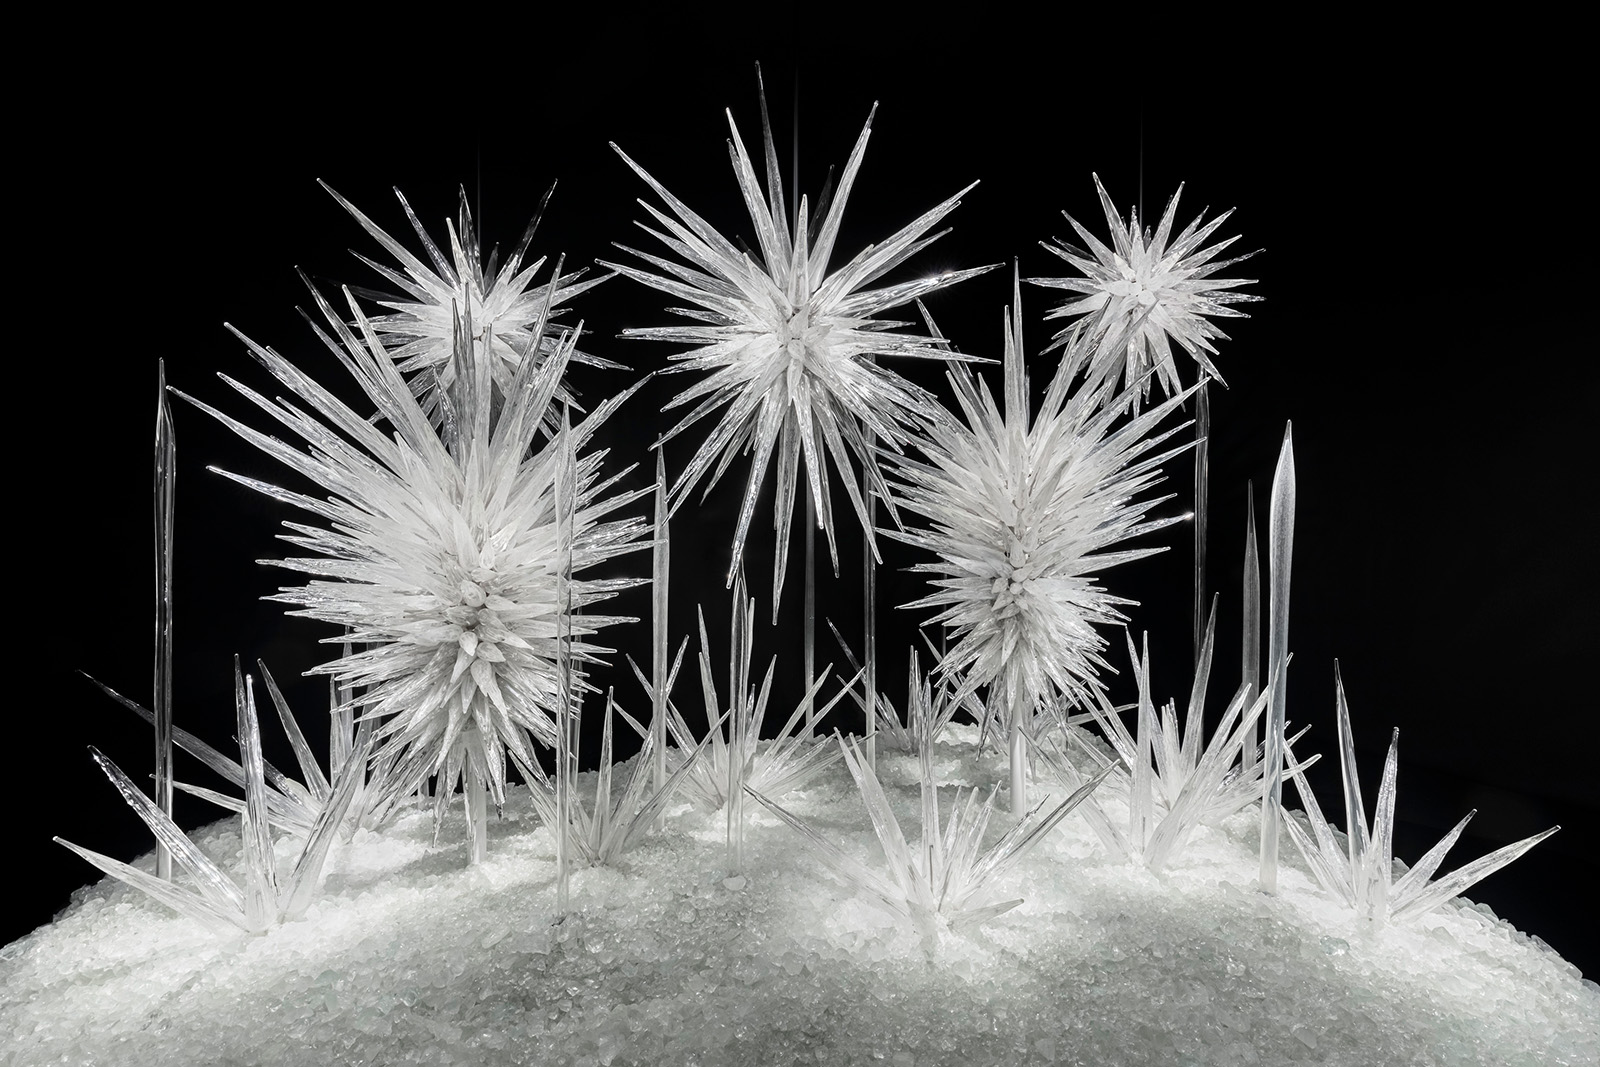 Winter Brilliance, 2015 by Dale Chihuly